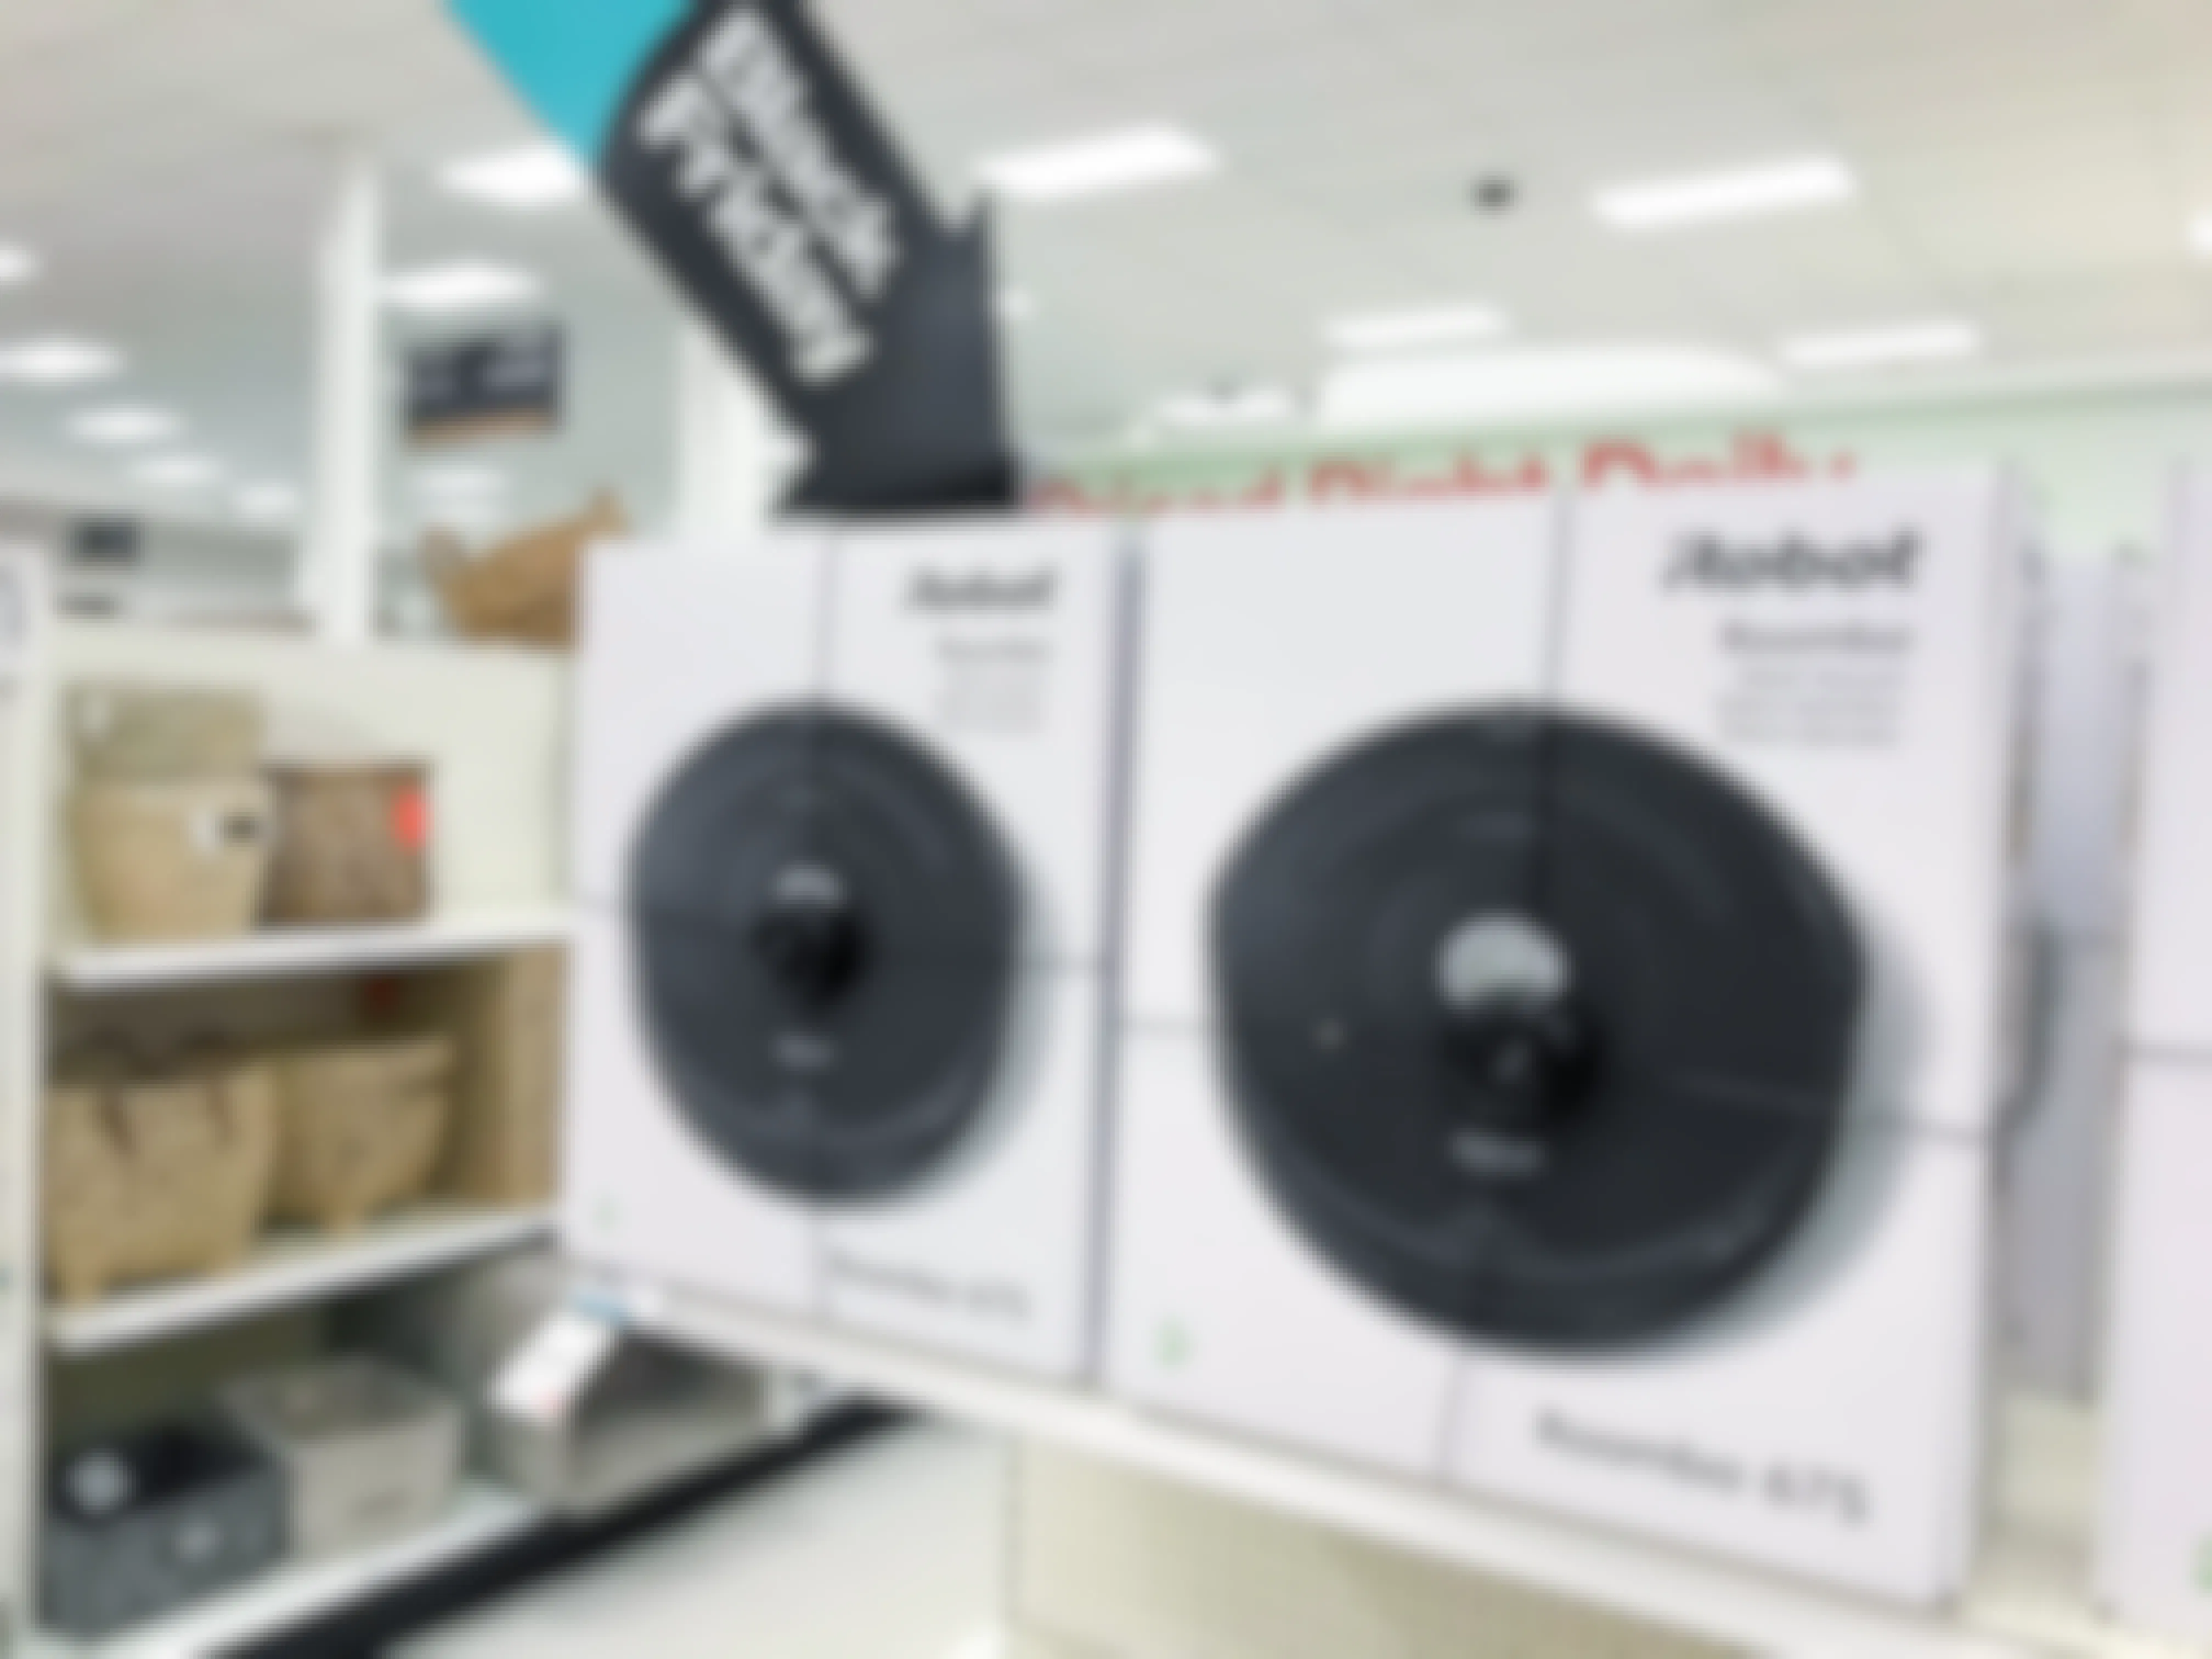 Amazon iRobot Roombas on a shelf with a big sign shaped like an arrow that says, "Black Friday" pointing to the Roombas.